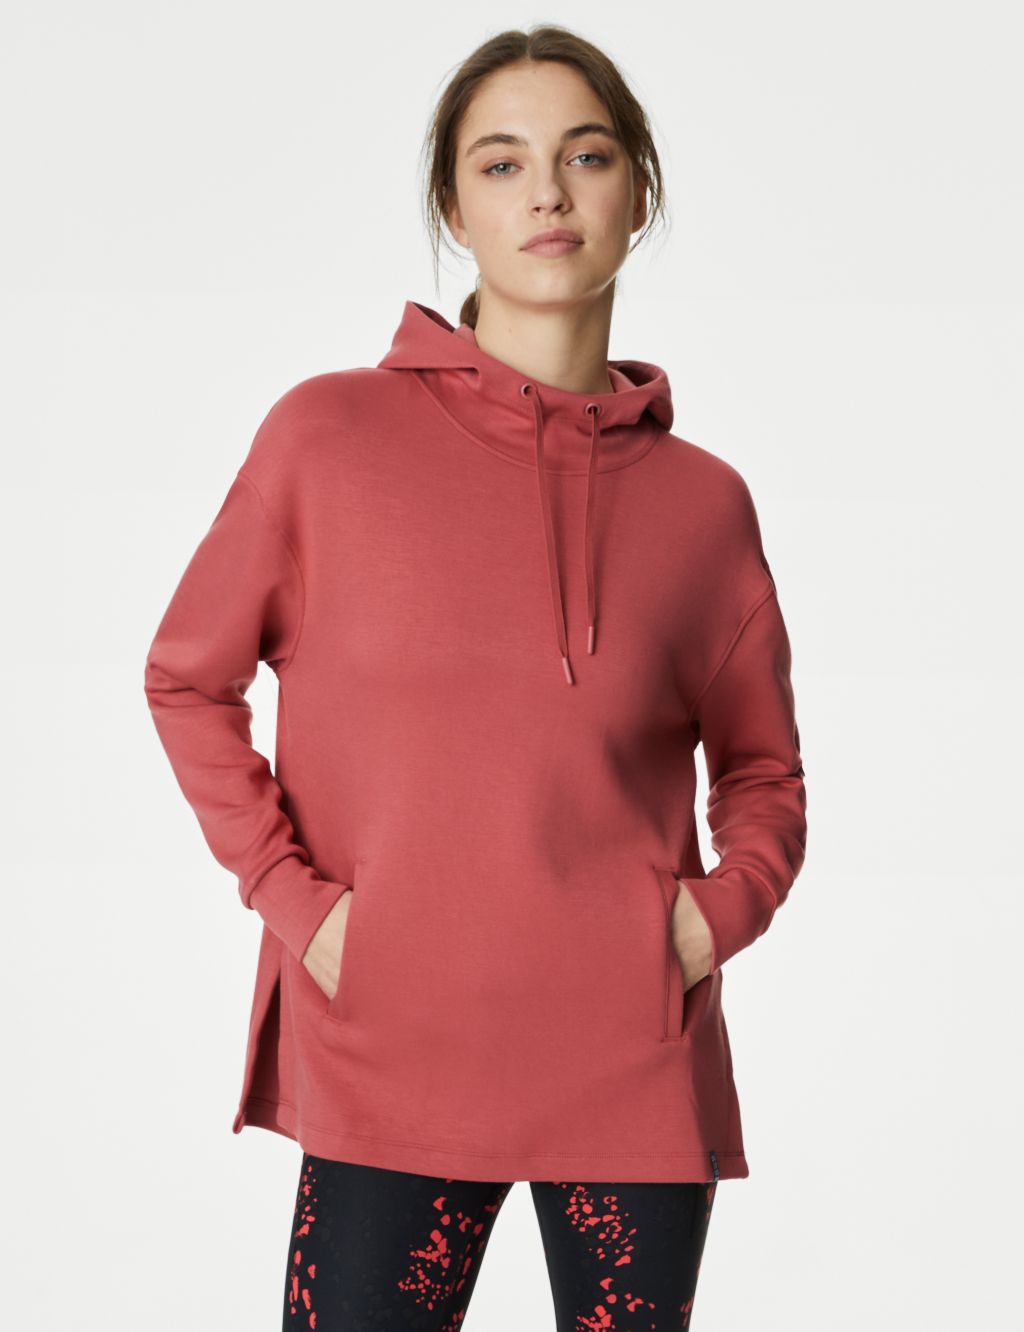 Quarter Zip Hoodie Women - 1/4 Zipper Clothes For Teen Girls, Gym Sweaters  For Women Casual Long Sleeve Sweatshirts For Outdoor Exercise